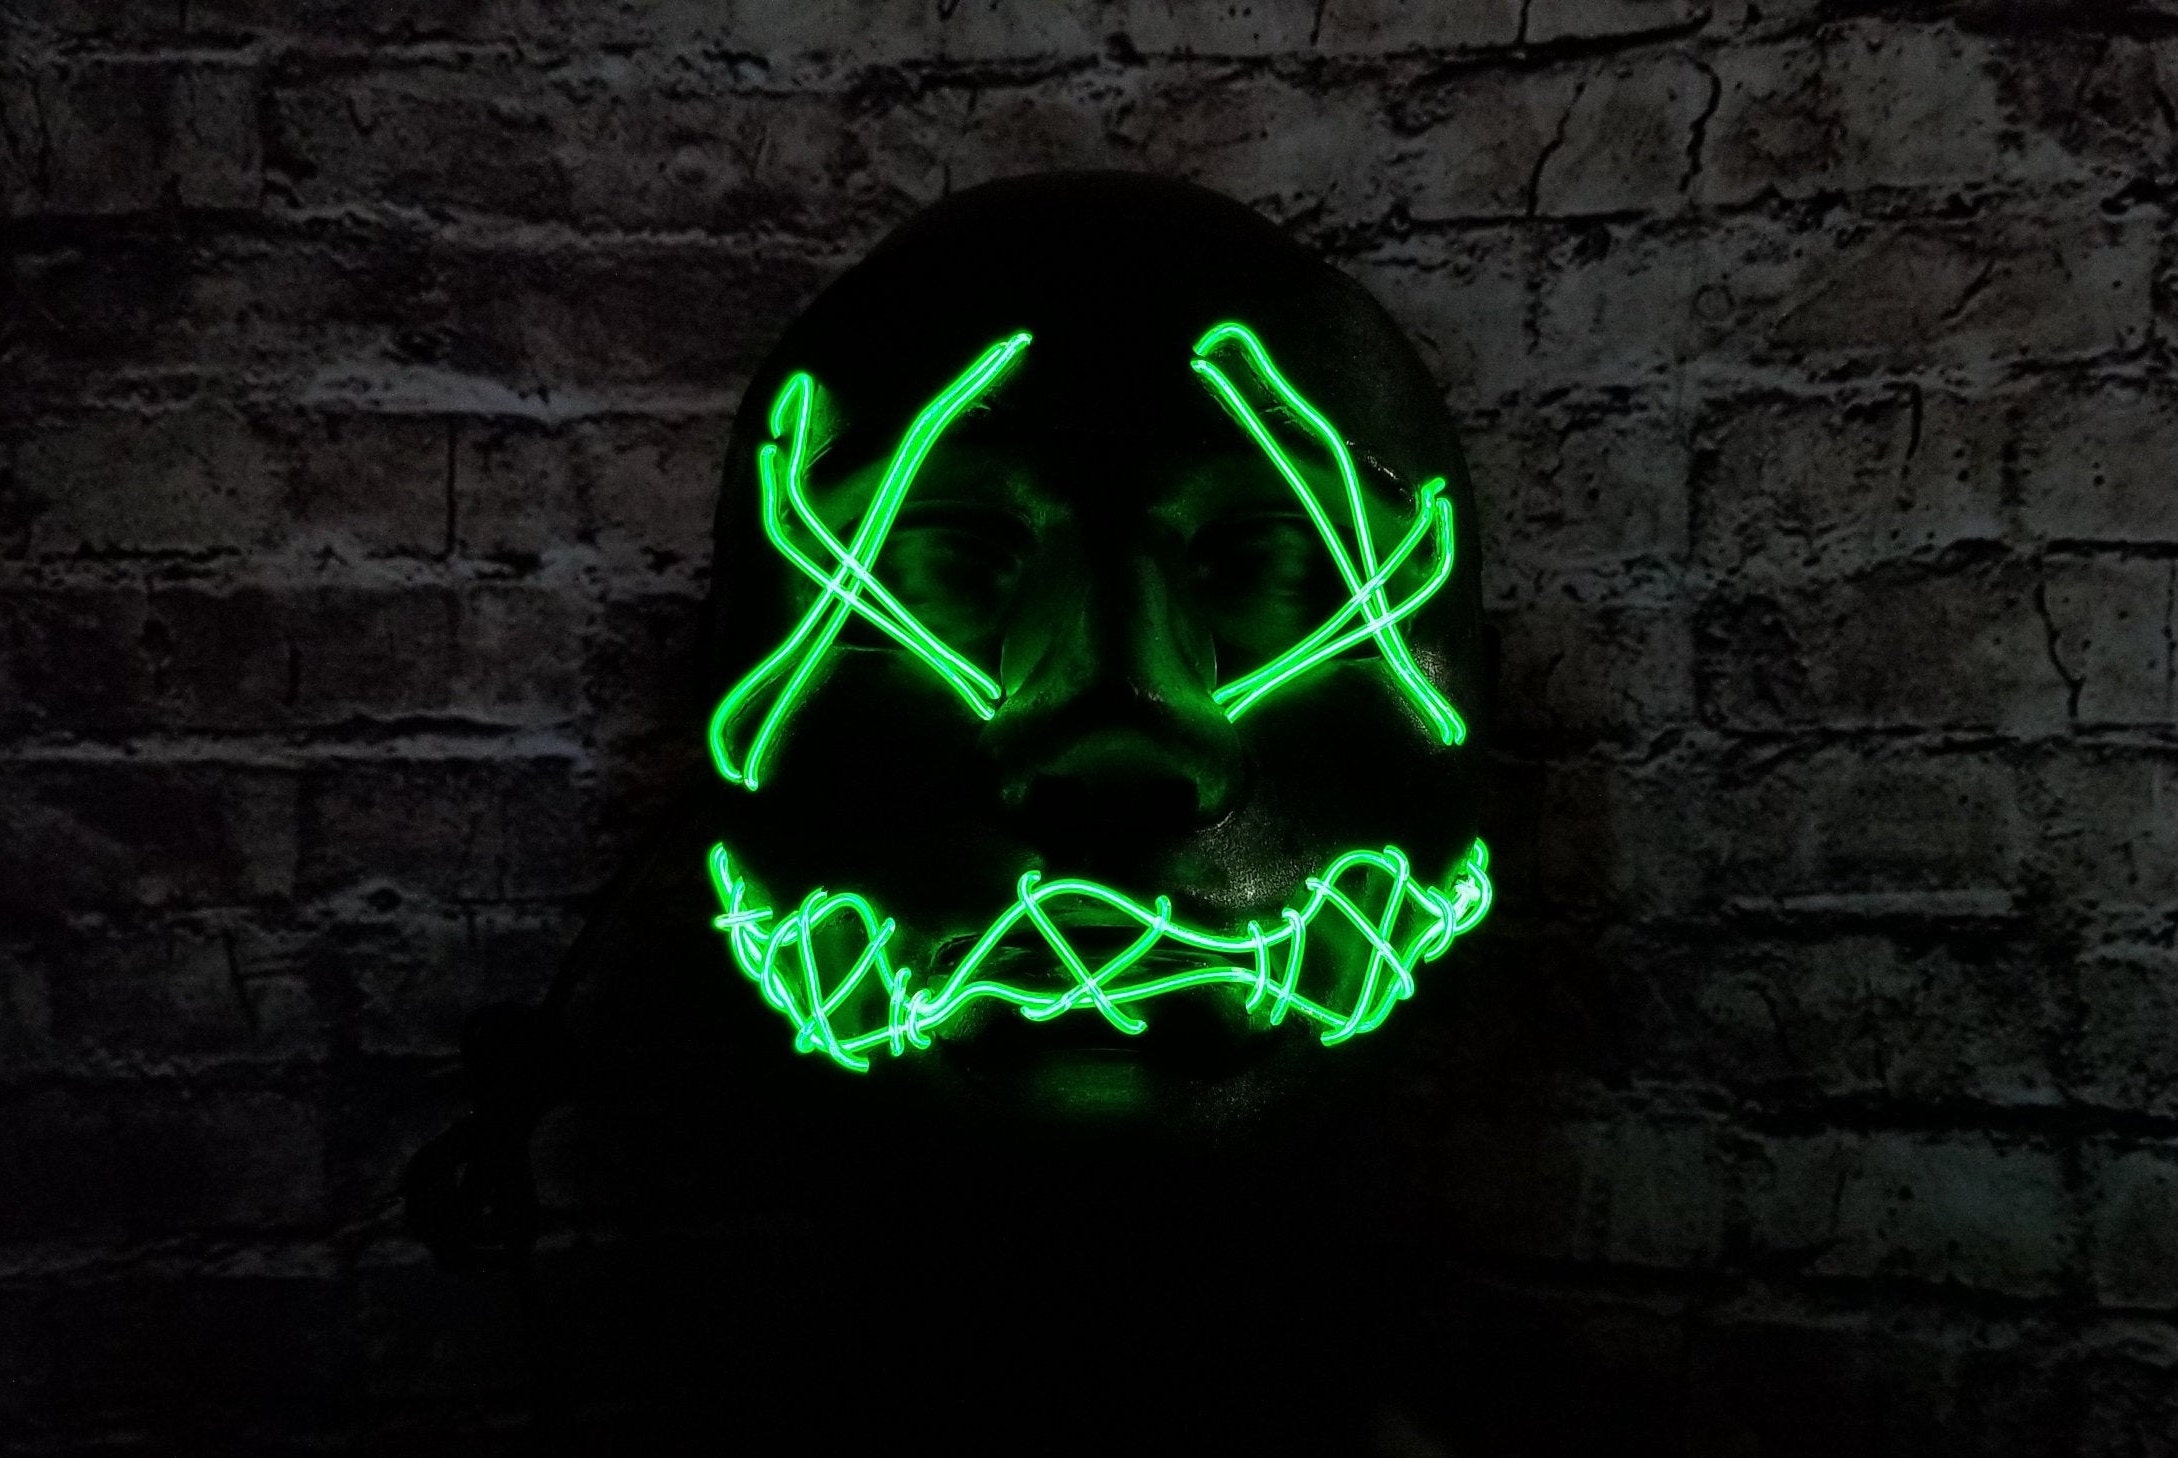 STITCHES LED Light up Mask El Wire Edc Festival Outfit | Etsy